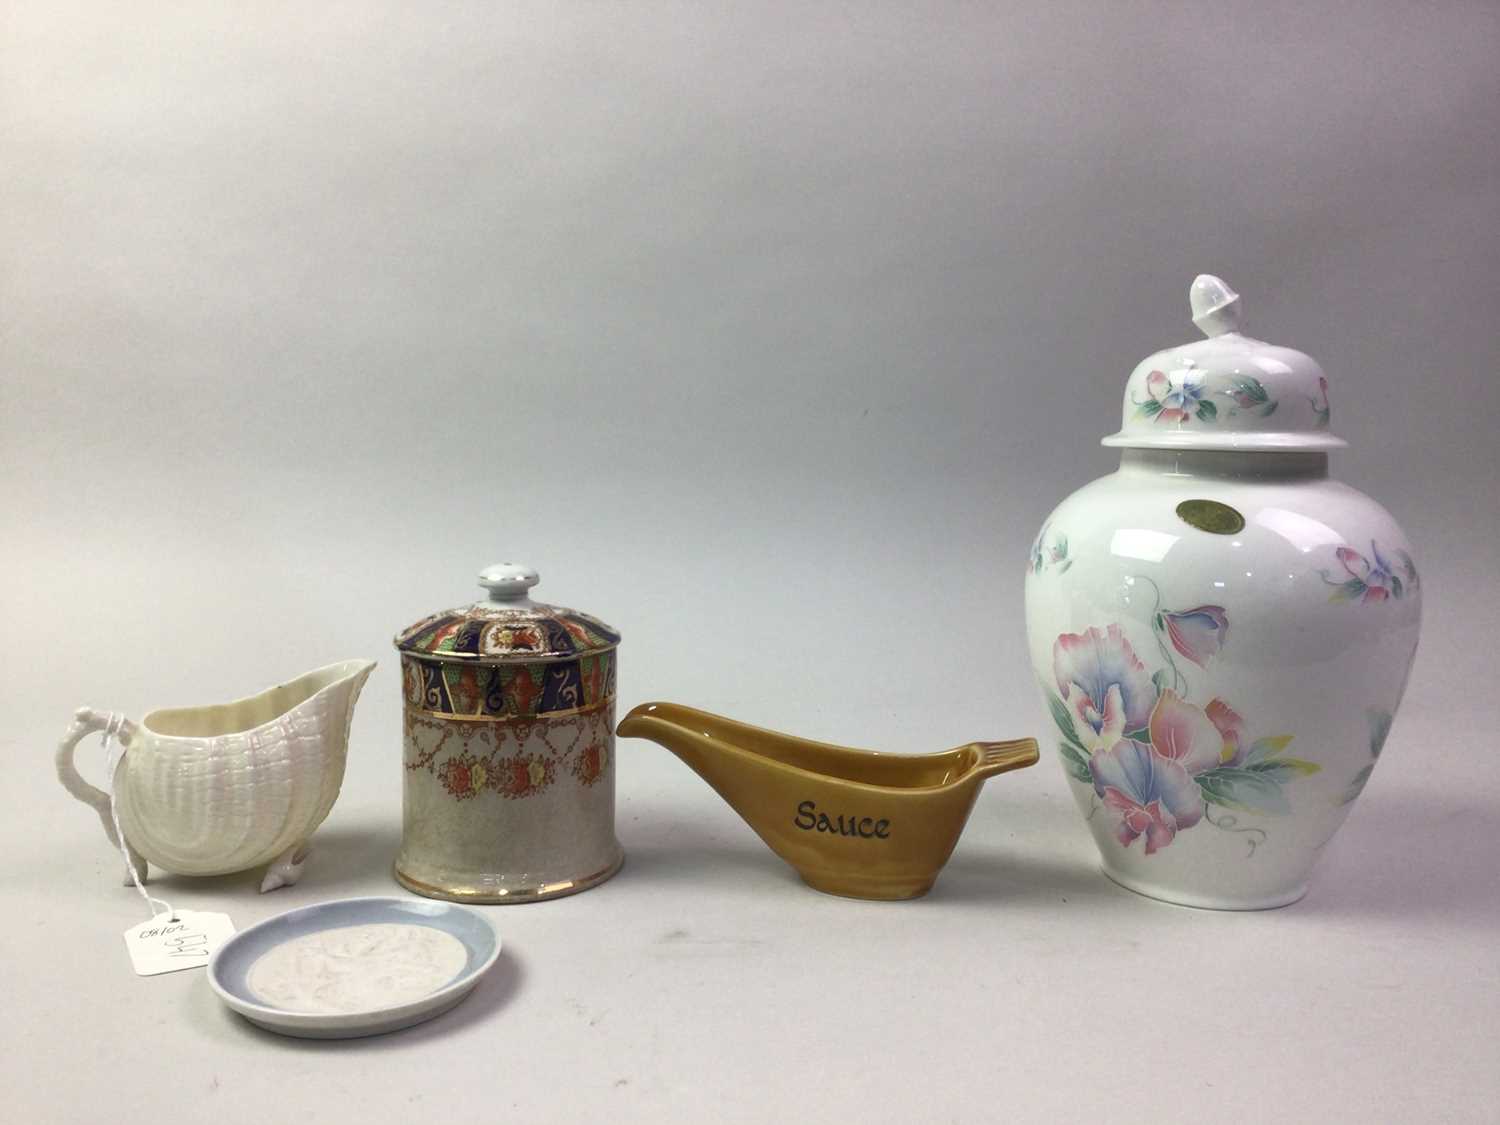 ROYAL CROWN DERBY COFFEE CUP AND SAUCER, ALONG WITH OTHER MIXED CERAMICS - Image 2 of 2